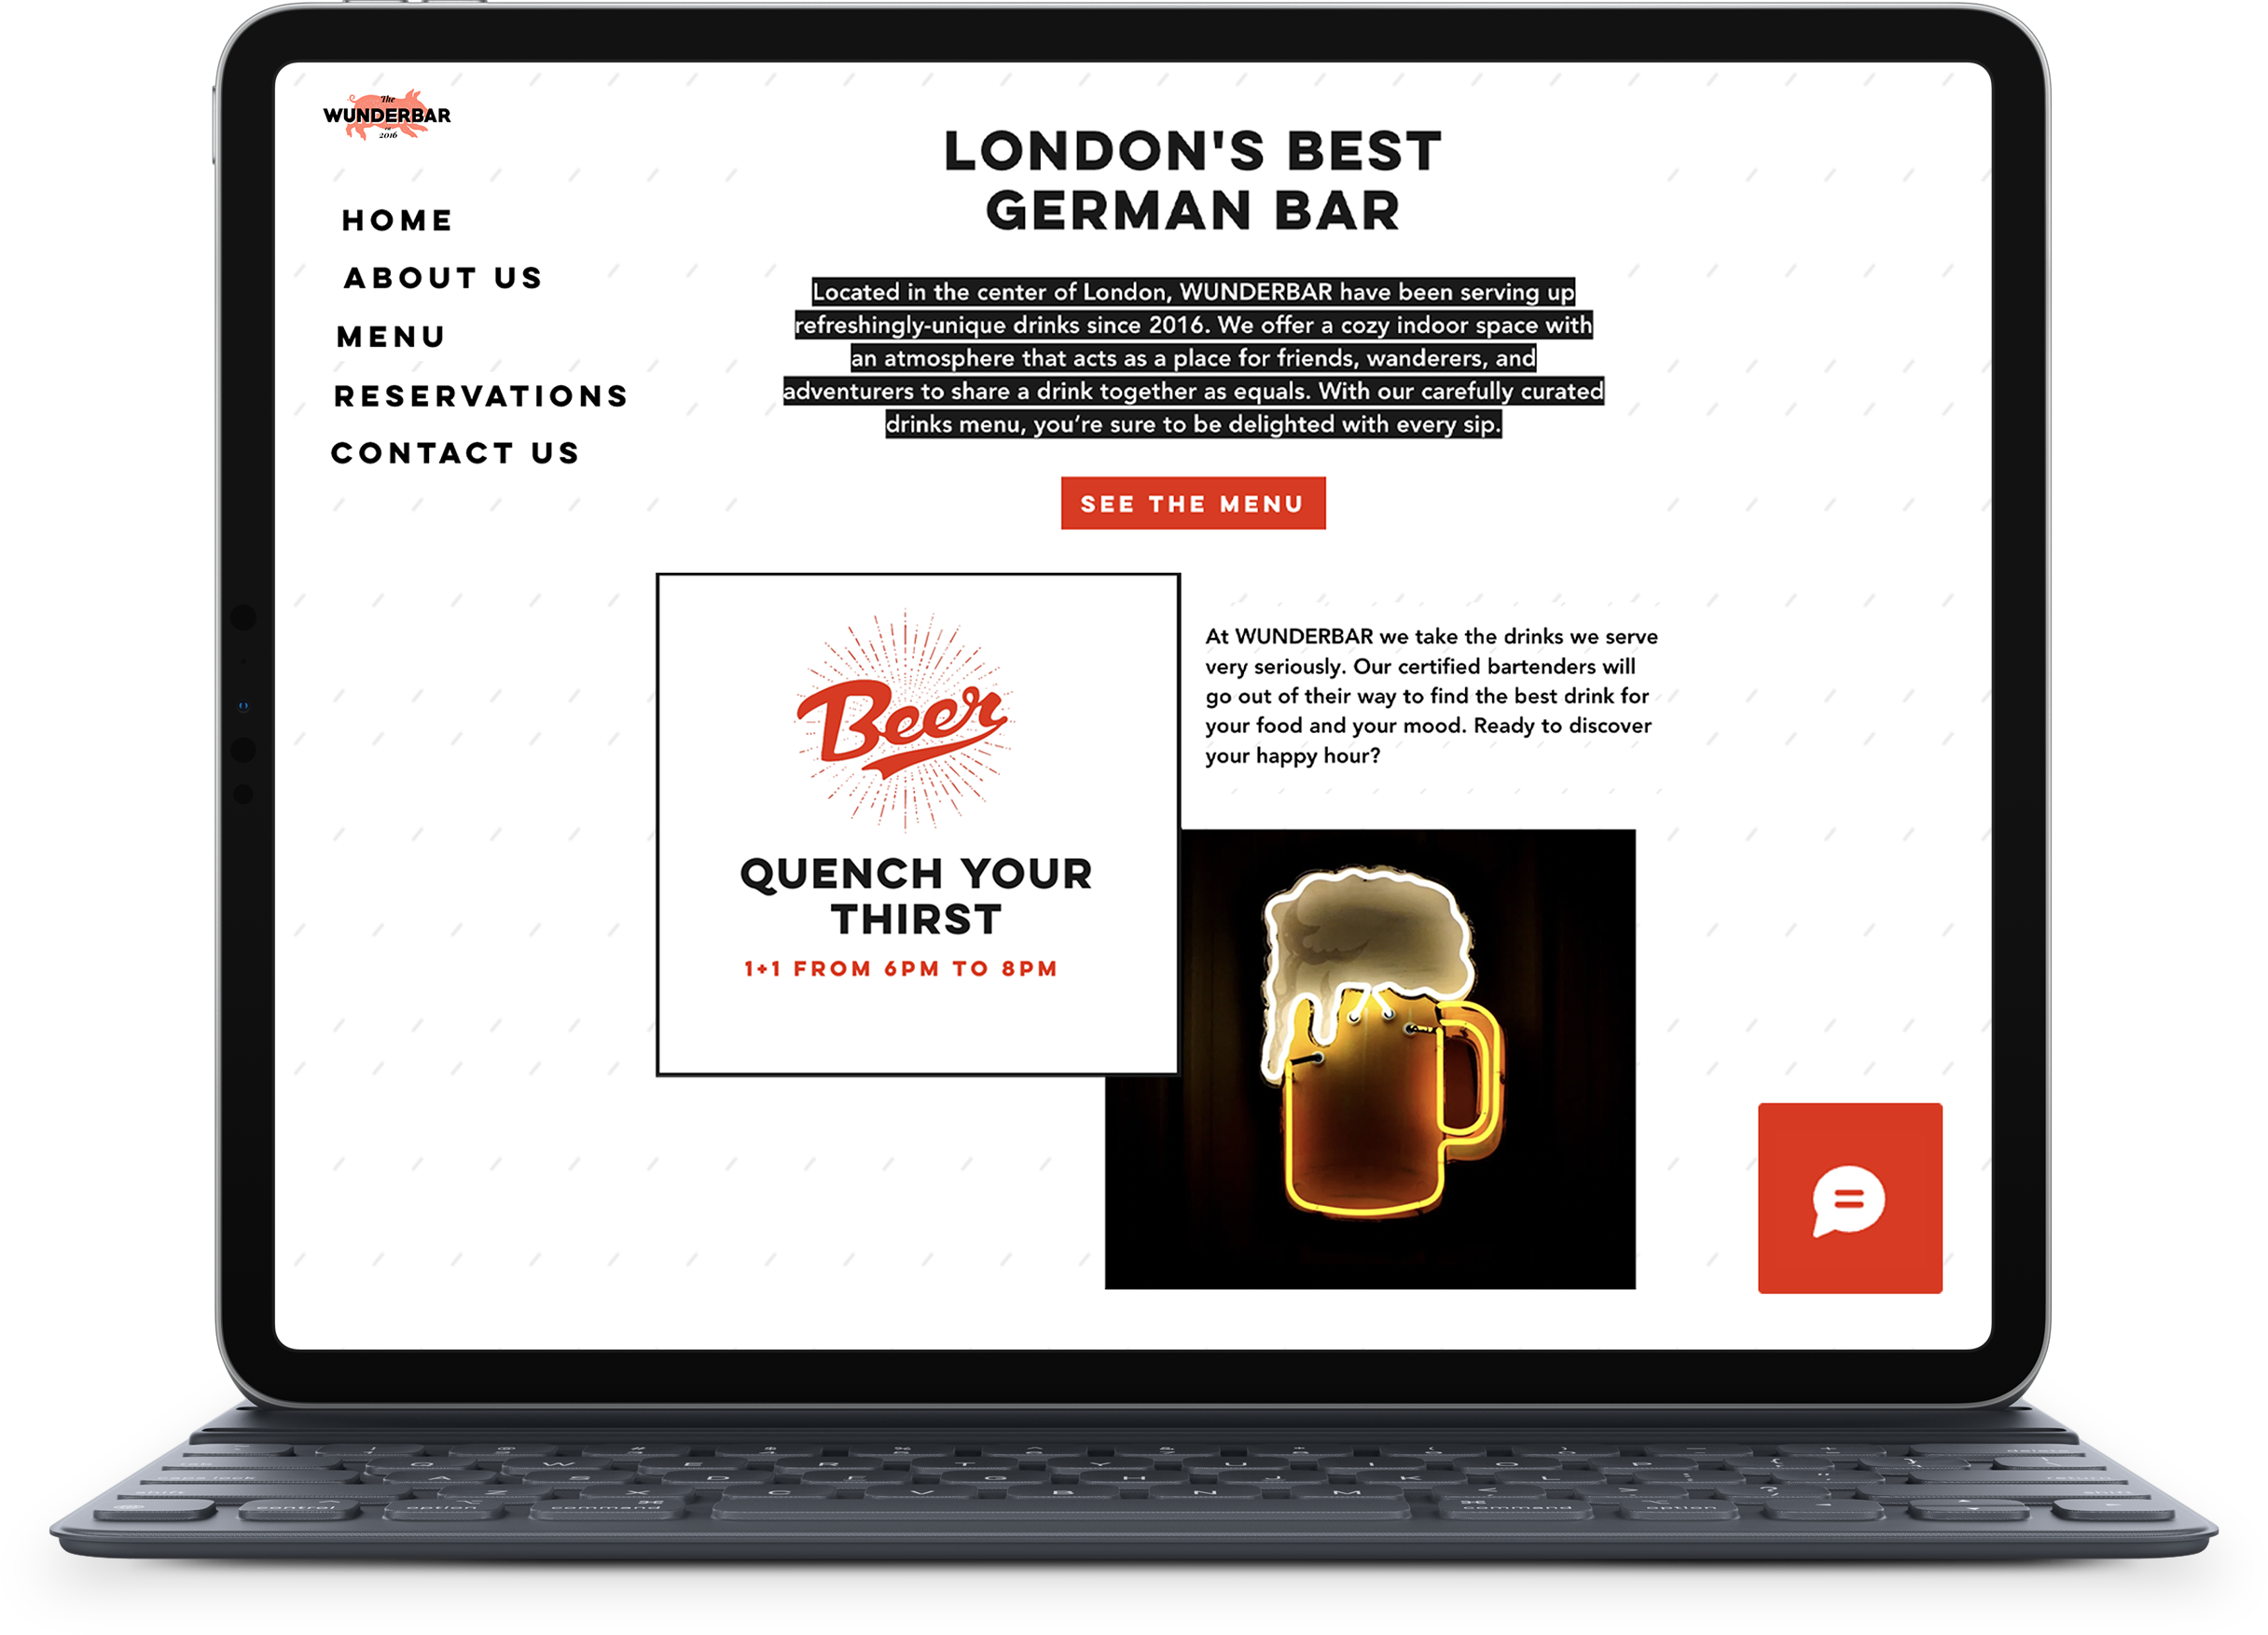 An iPad displaying the intro page of the website. The top half has some info on the bar. The bottom half has an image of a florescent light in the shape of a beer next to the opening hours.